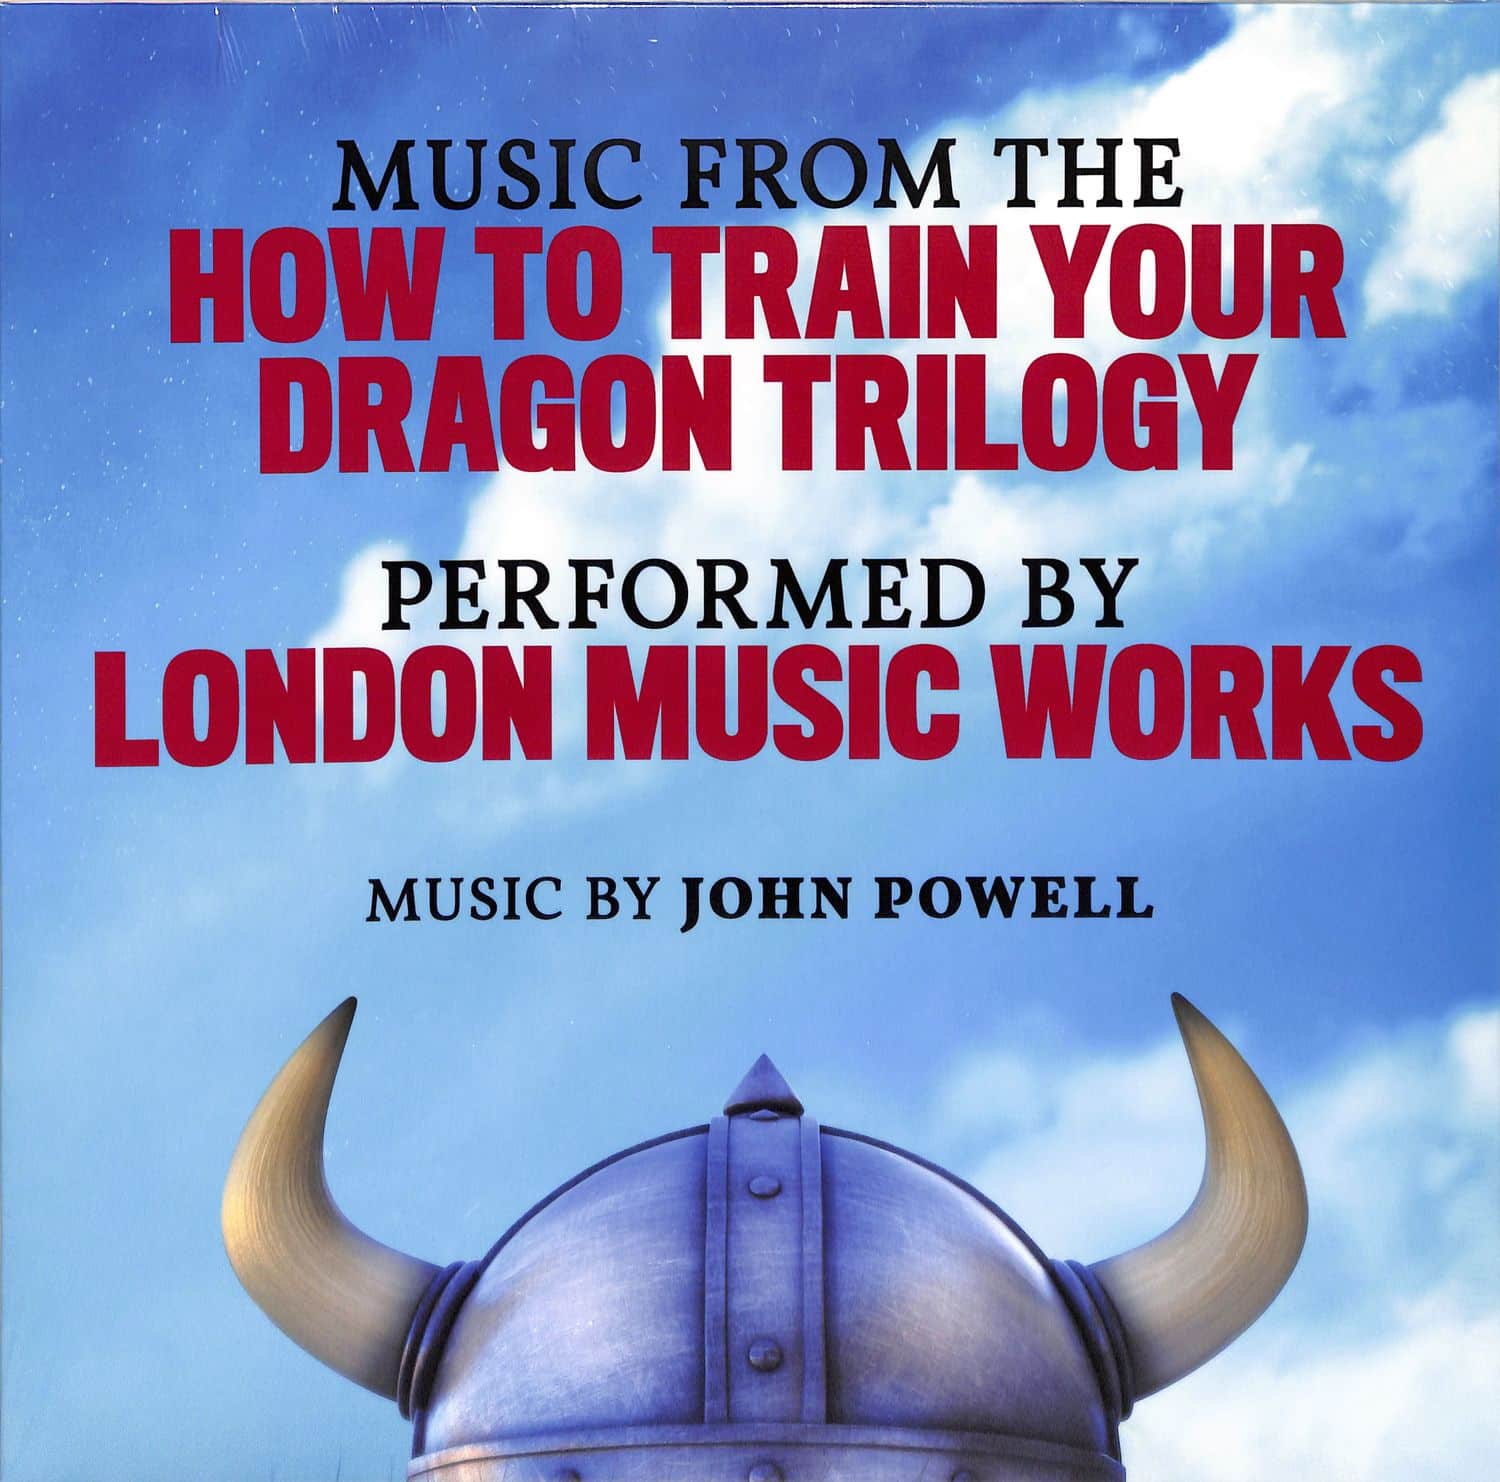 London Music Works - MUSIC FROM THE HOW TO TRAIN YOUR DRAGON TRILOGY 